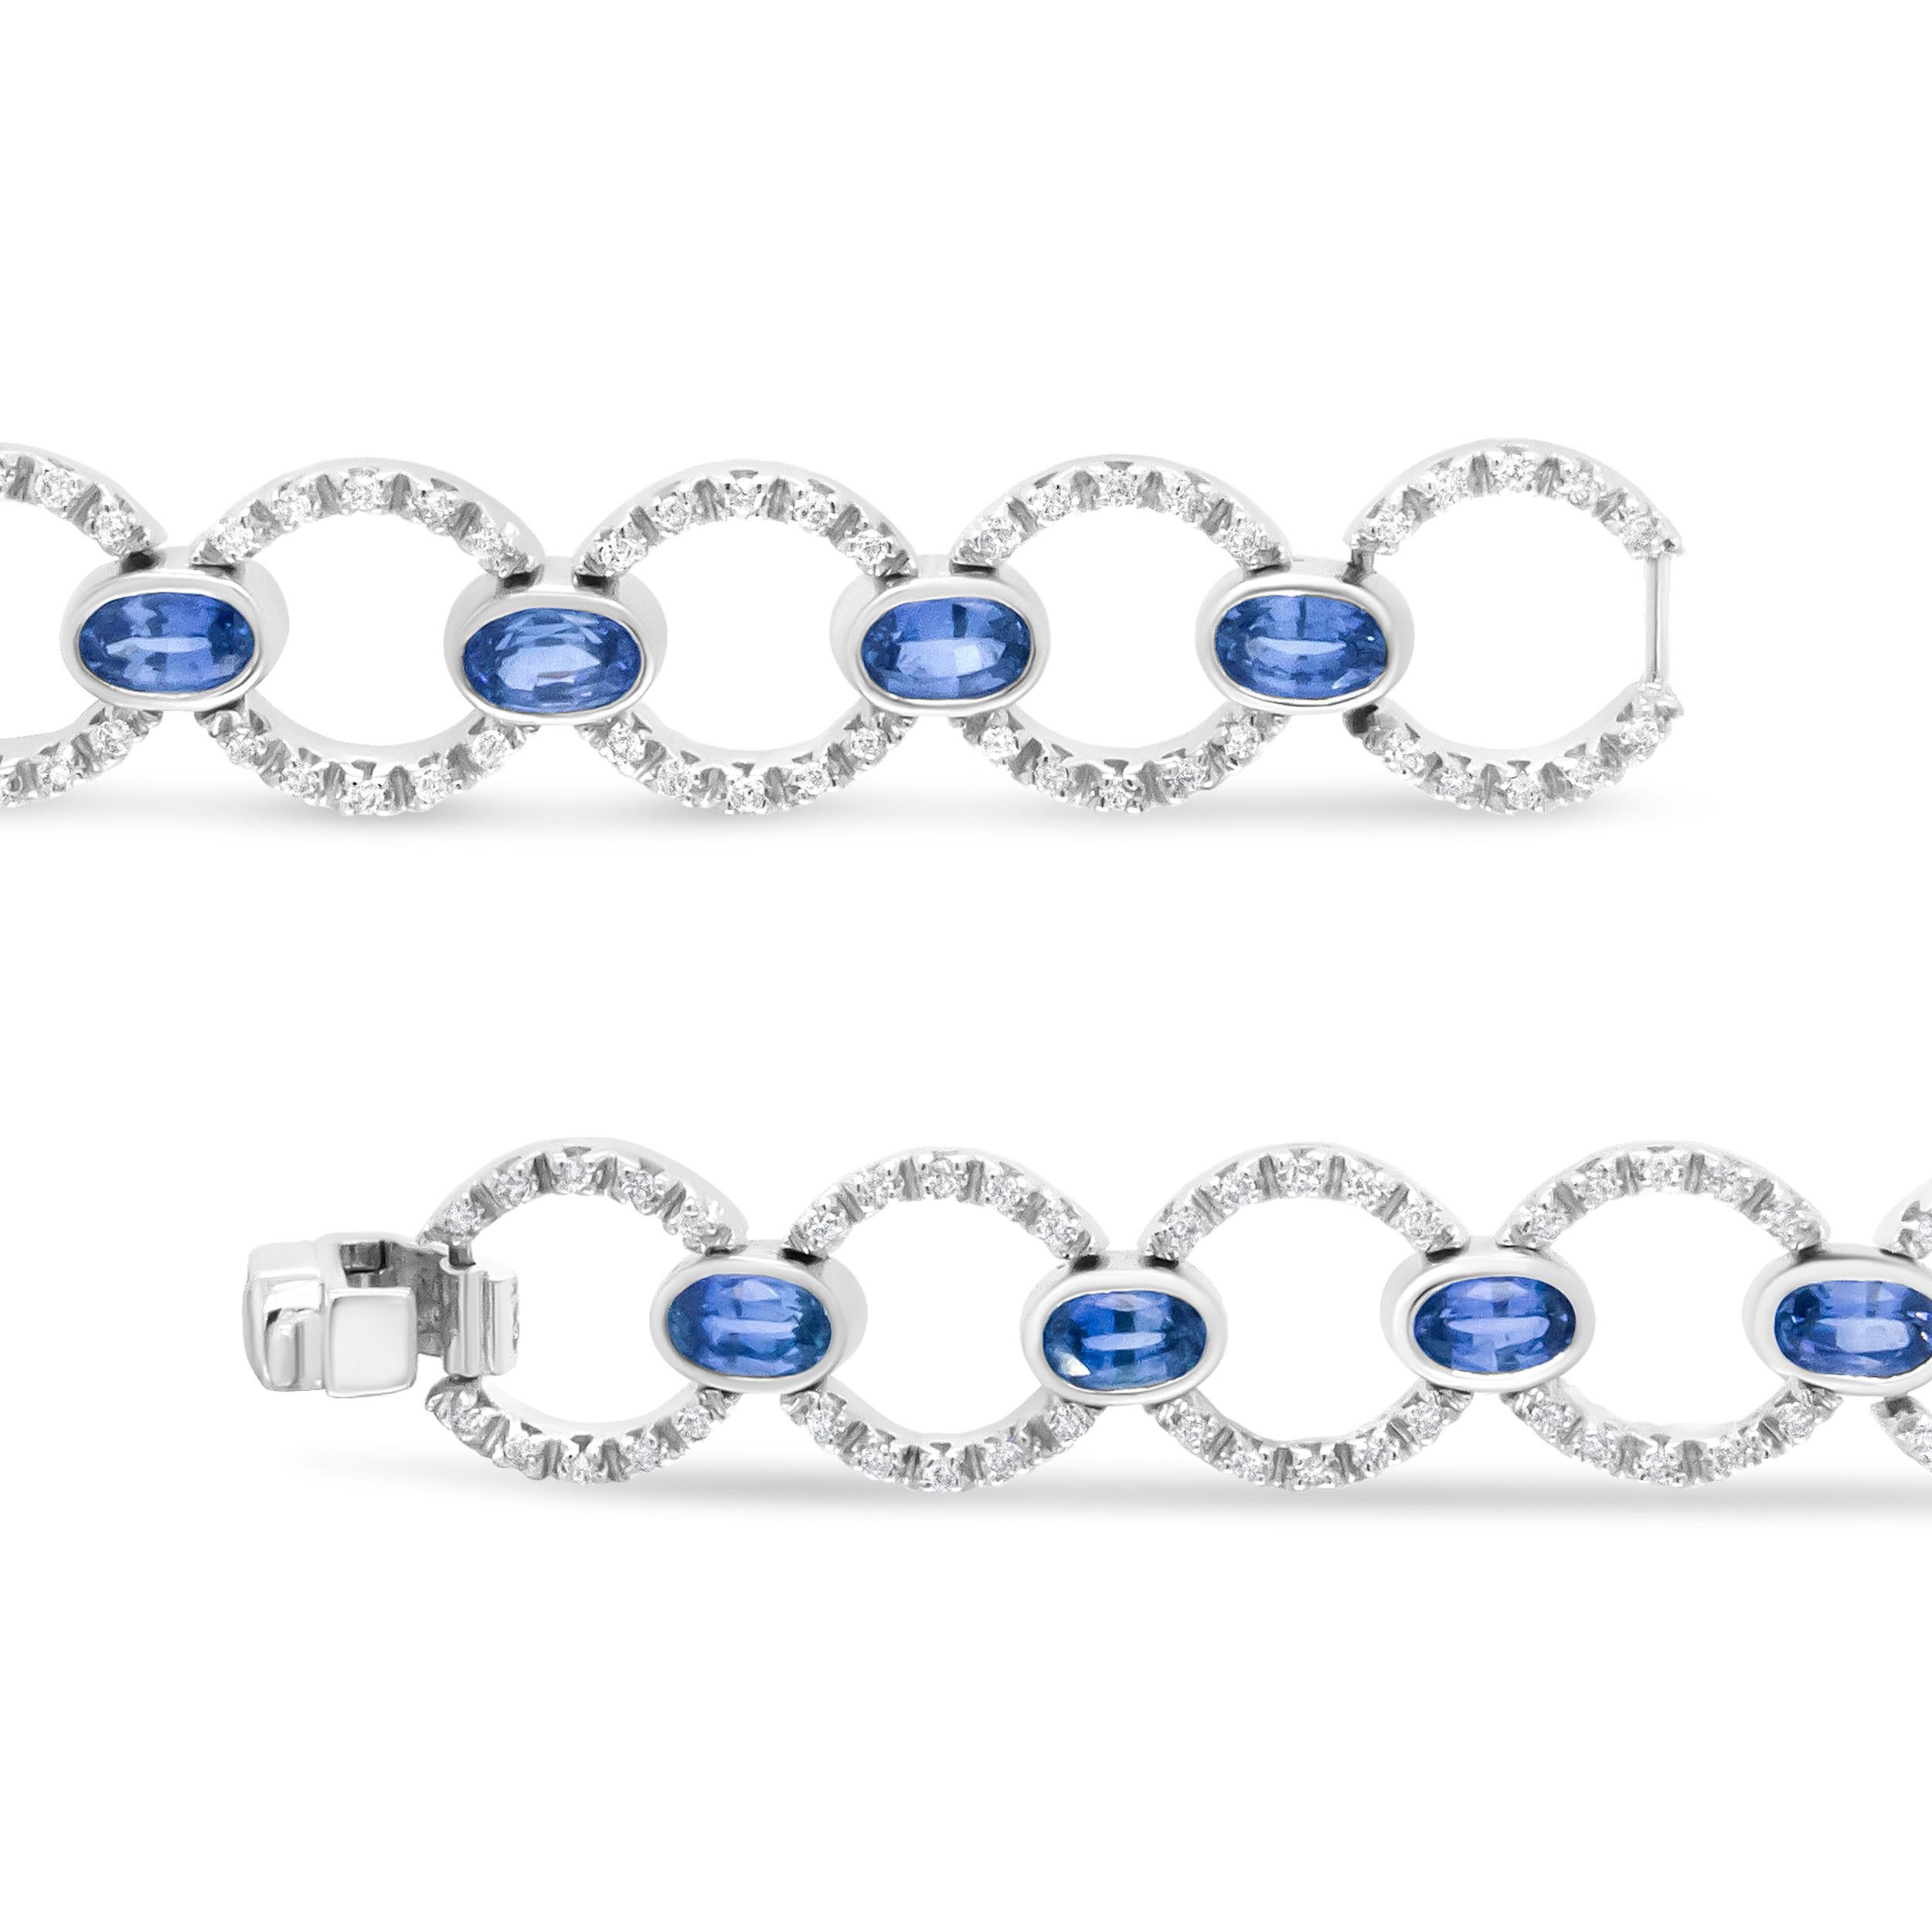 Contemporary 18K White Gold 6 Ct Diamond and Oval Blue Sapphire Openwork Circle Link Bracelet For Sale